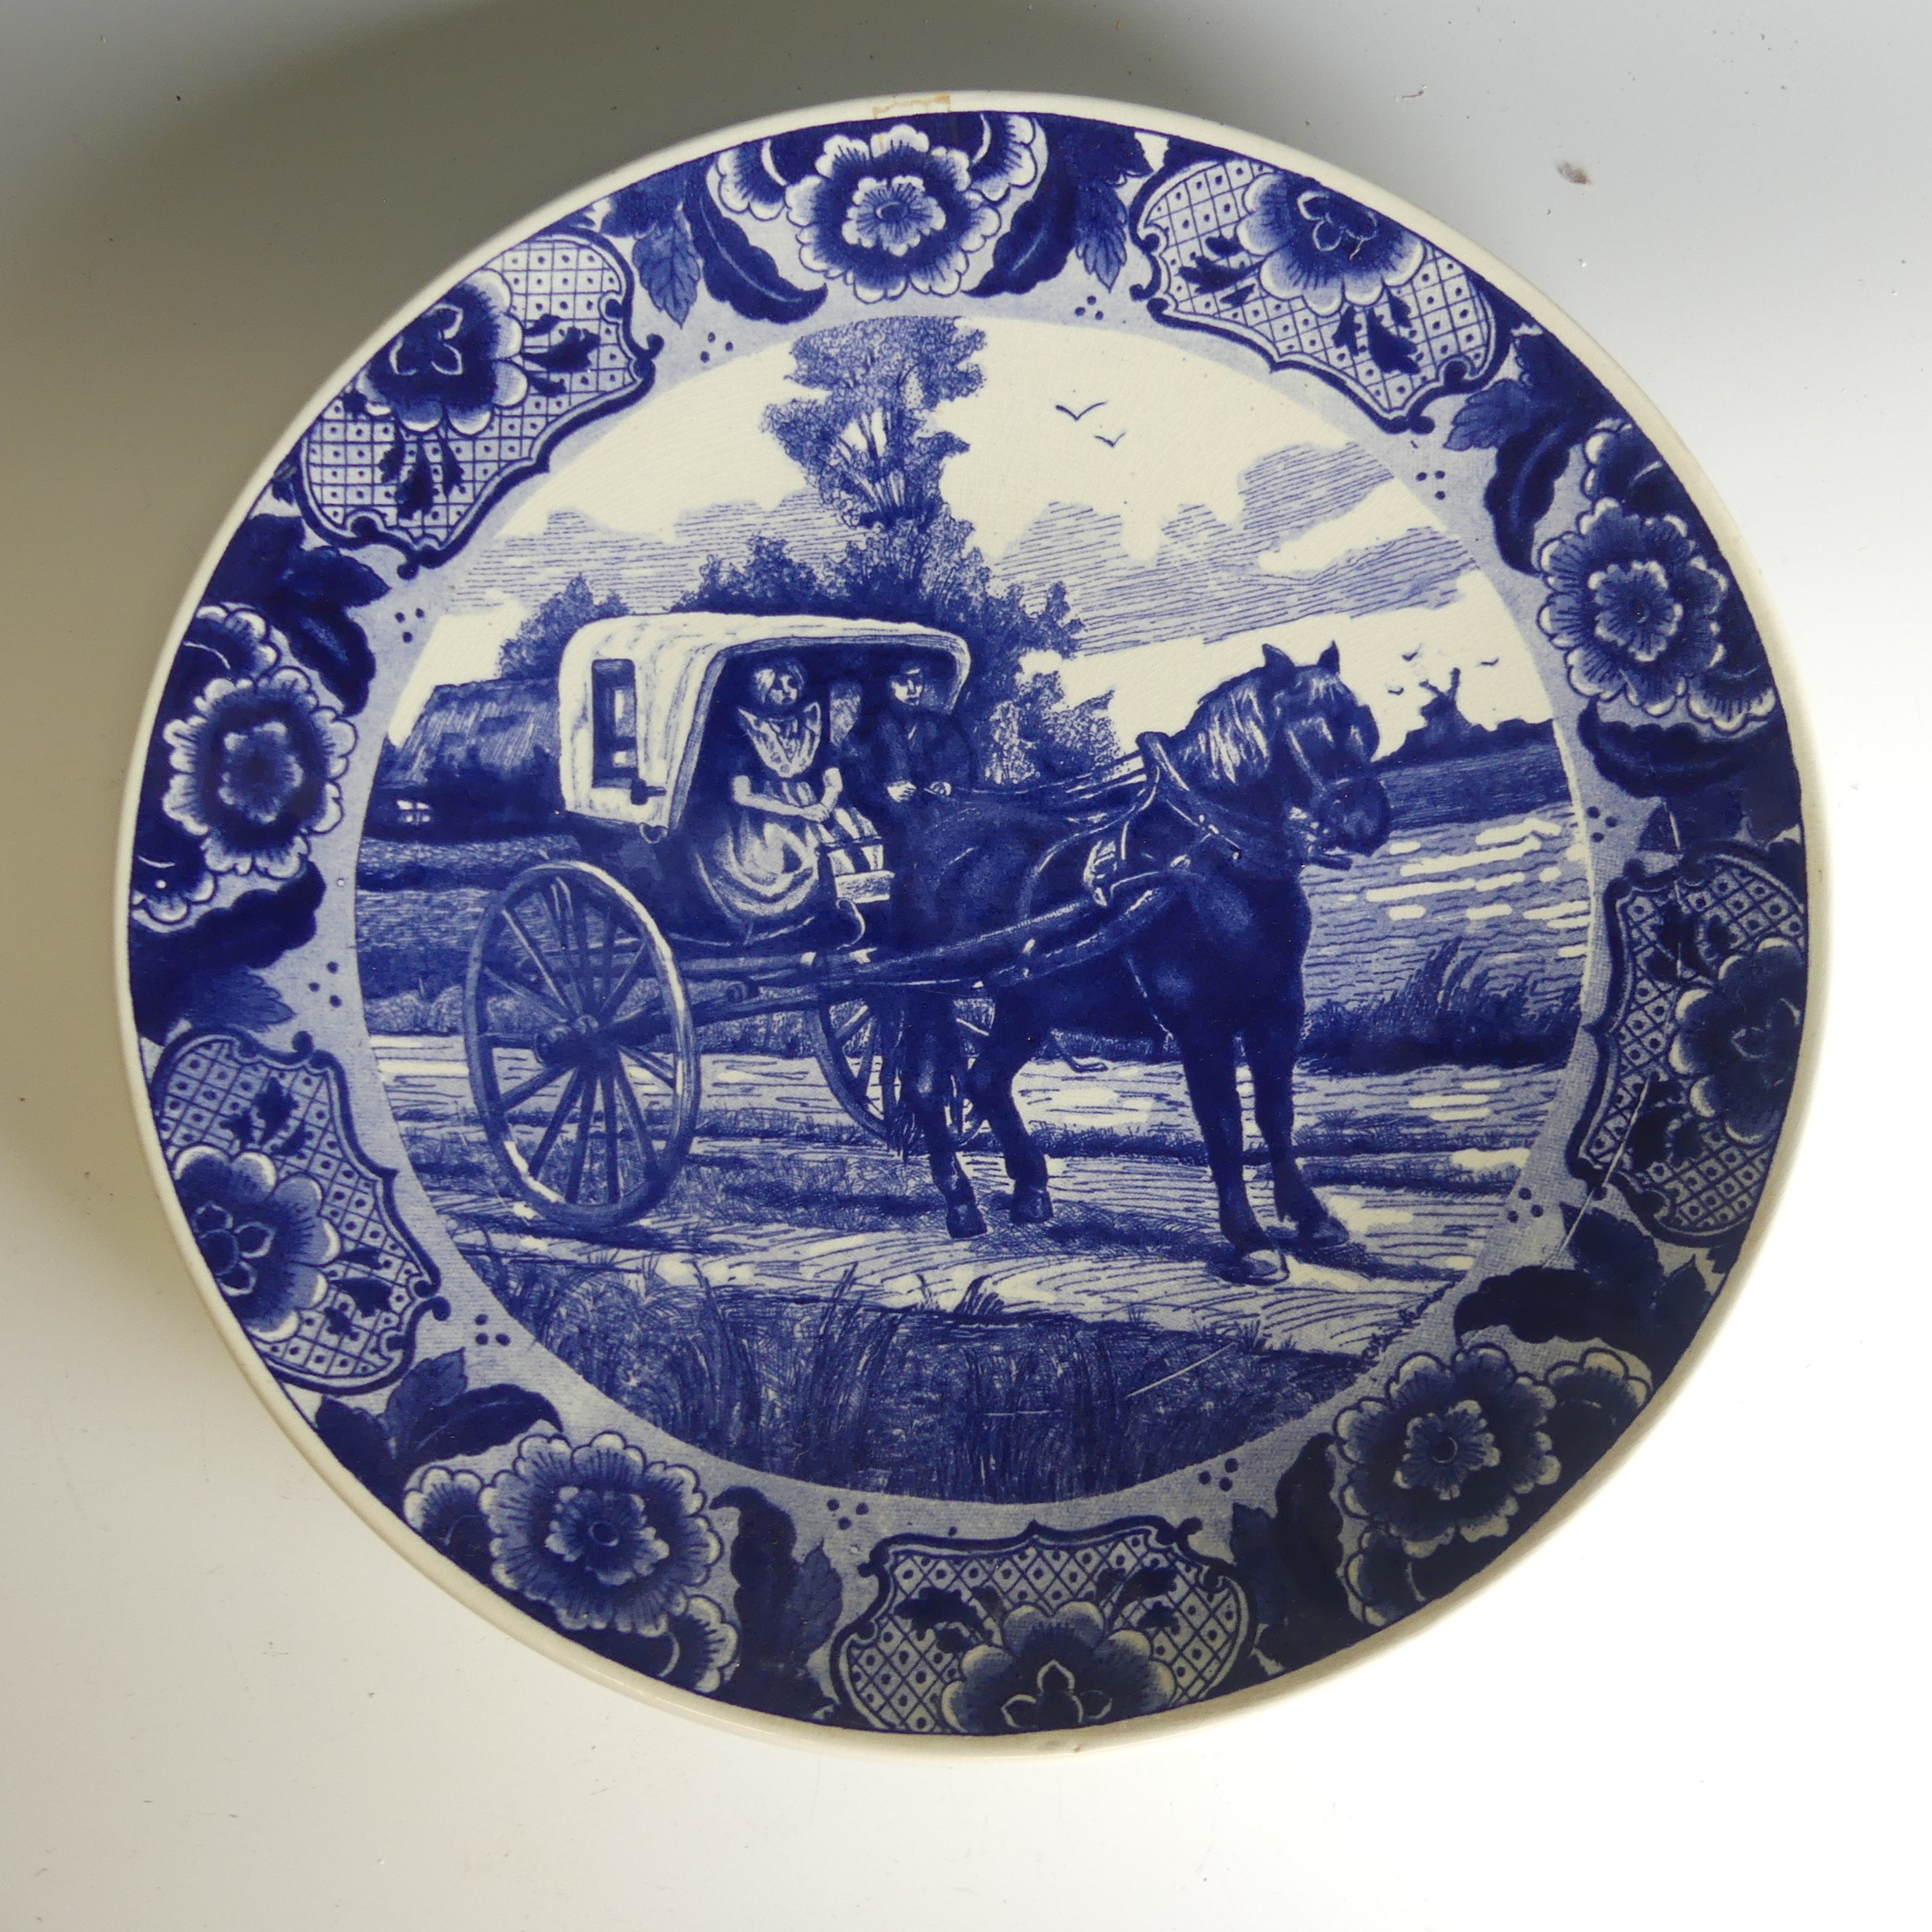 A pair of De Porceleyne Fles Delft pottery Plates, of moulded form, decorated with birds amongst - Image 3 of 10